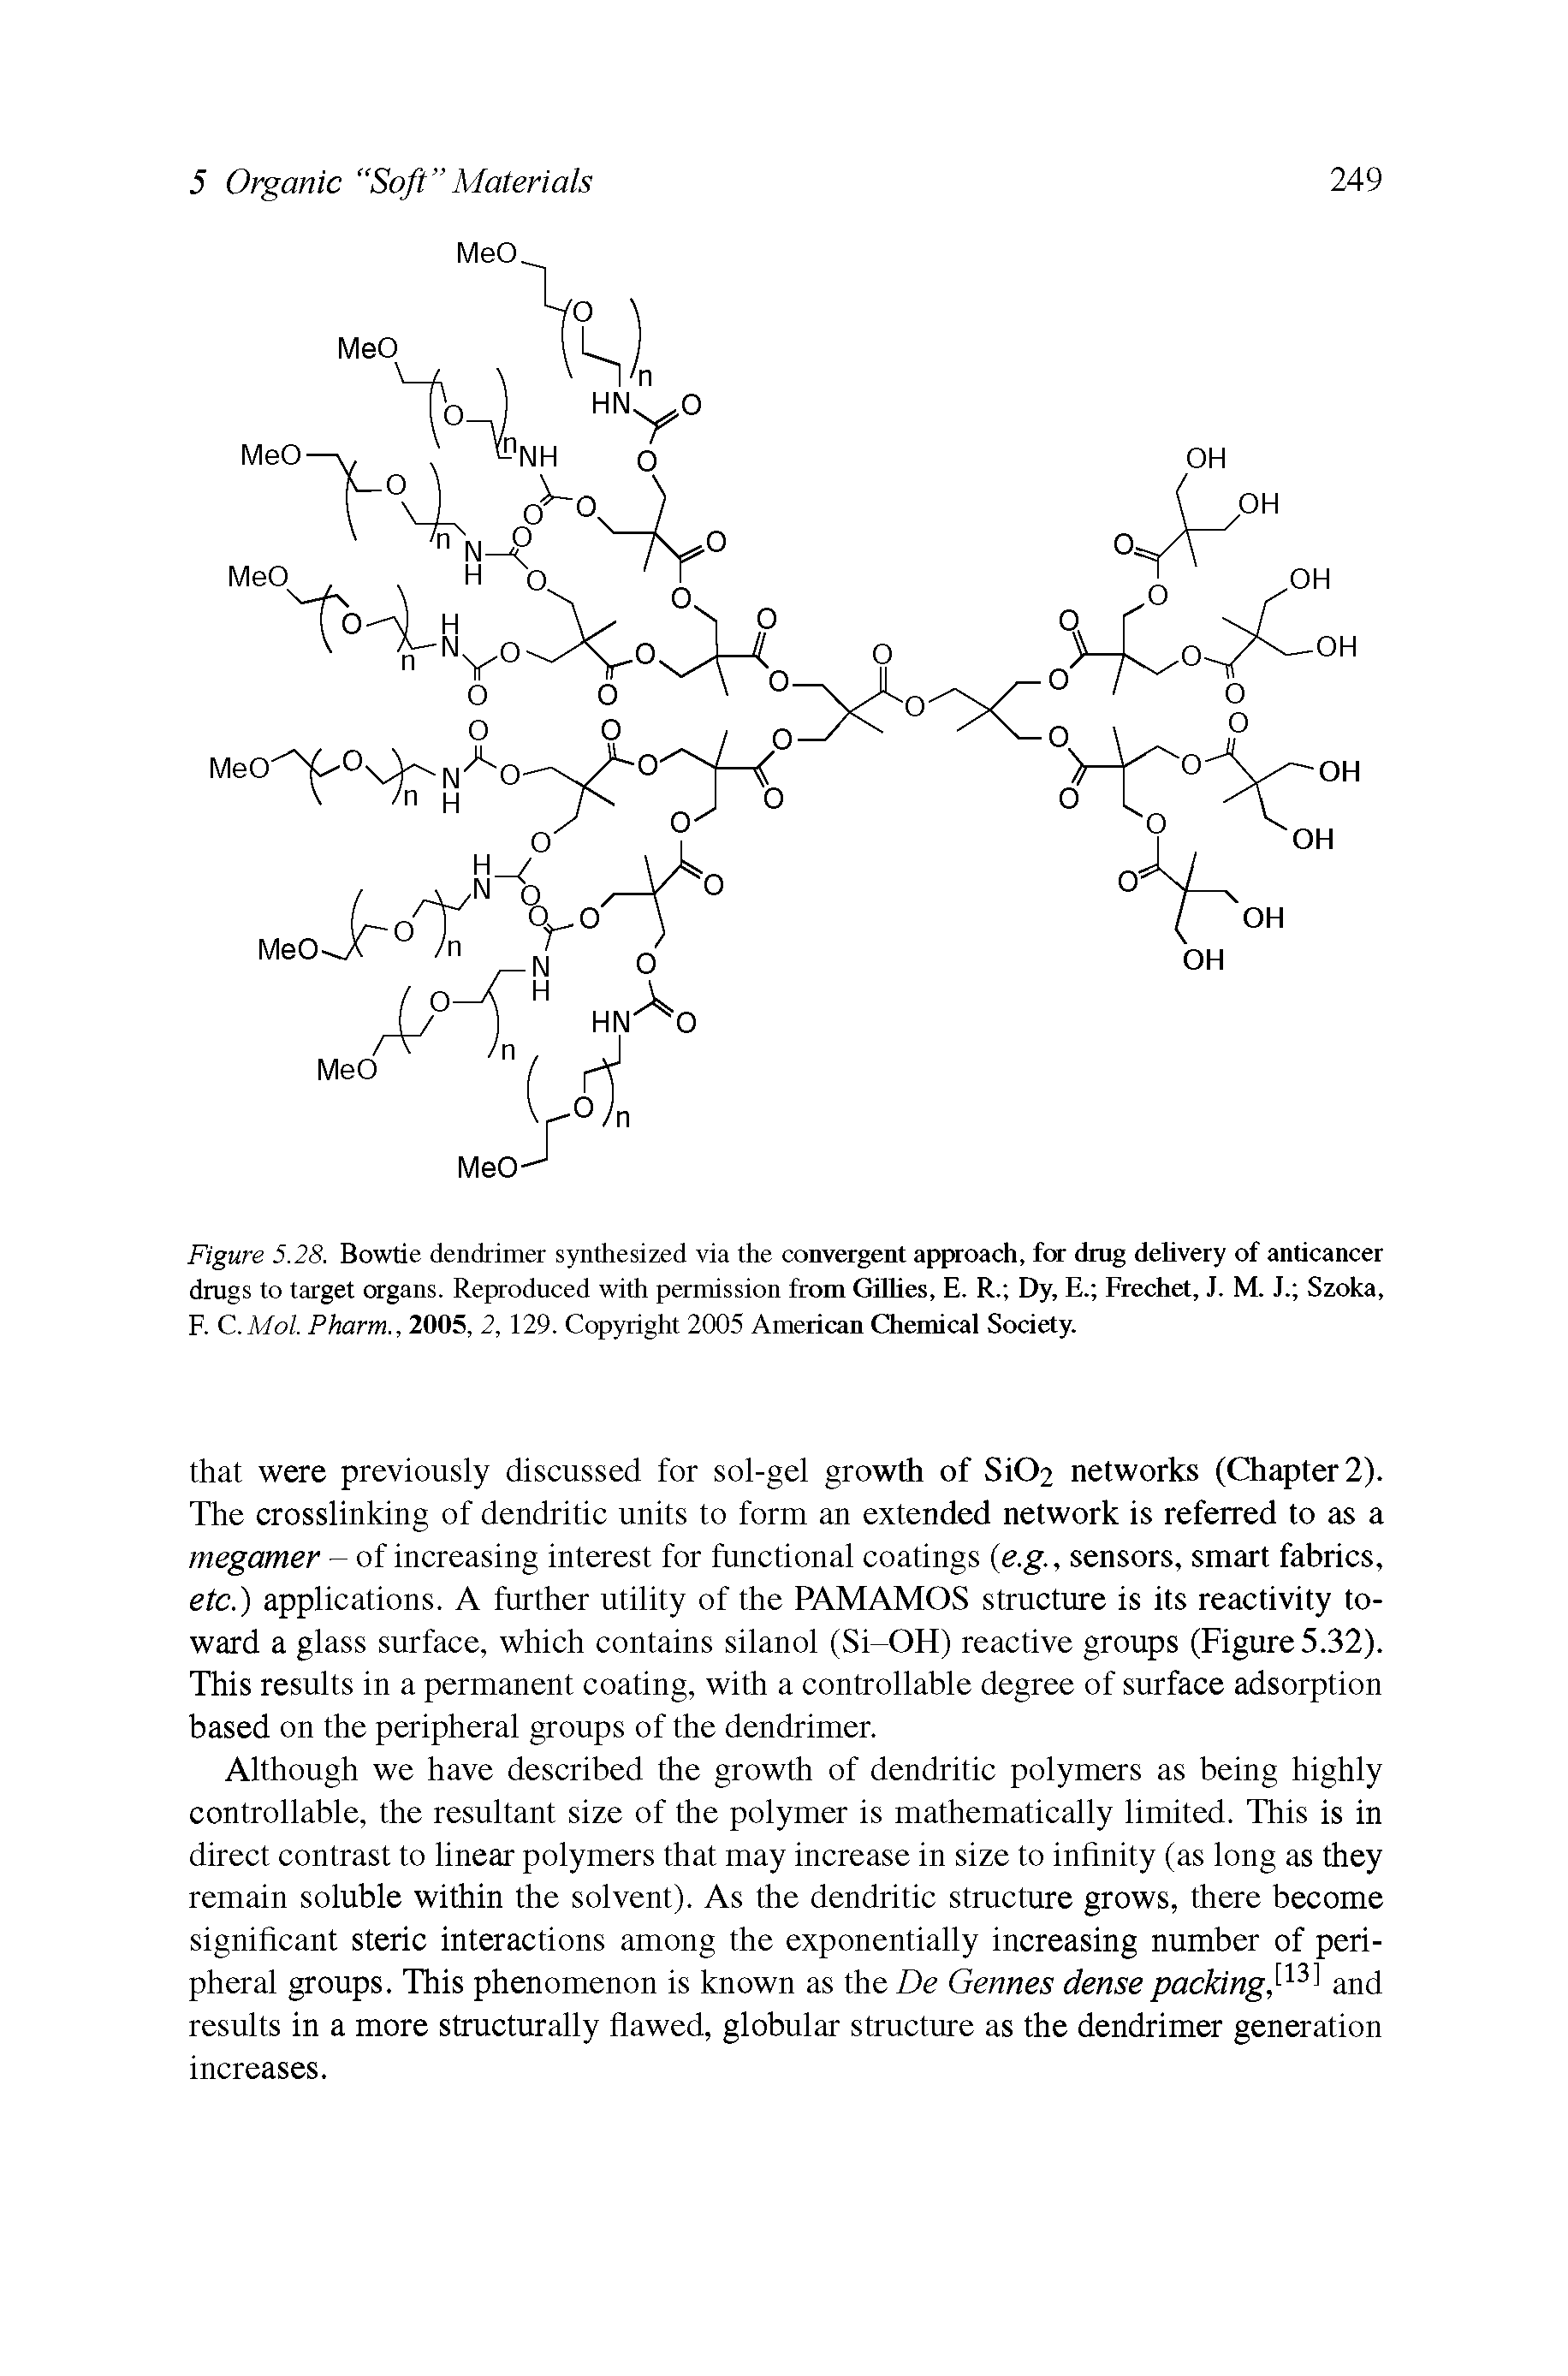 Figure 5.28. Bowtie dendrimer synthesized via the convergent approach, for drug delivery of anticancer drugs to target organs. Reproduced with permission from Gillies, E. R. Dy, E. Frechet, J. M. J. Szoka, F. C.Mol. Pharm., 2005, 2, 129. Copyright 2005 American Chemical Society.